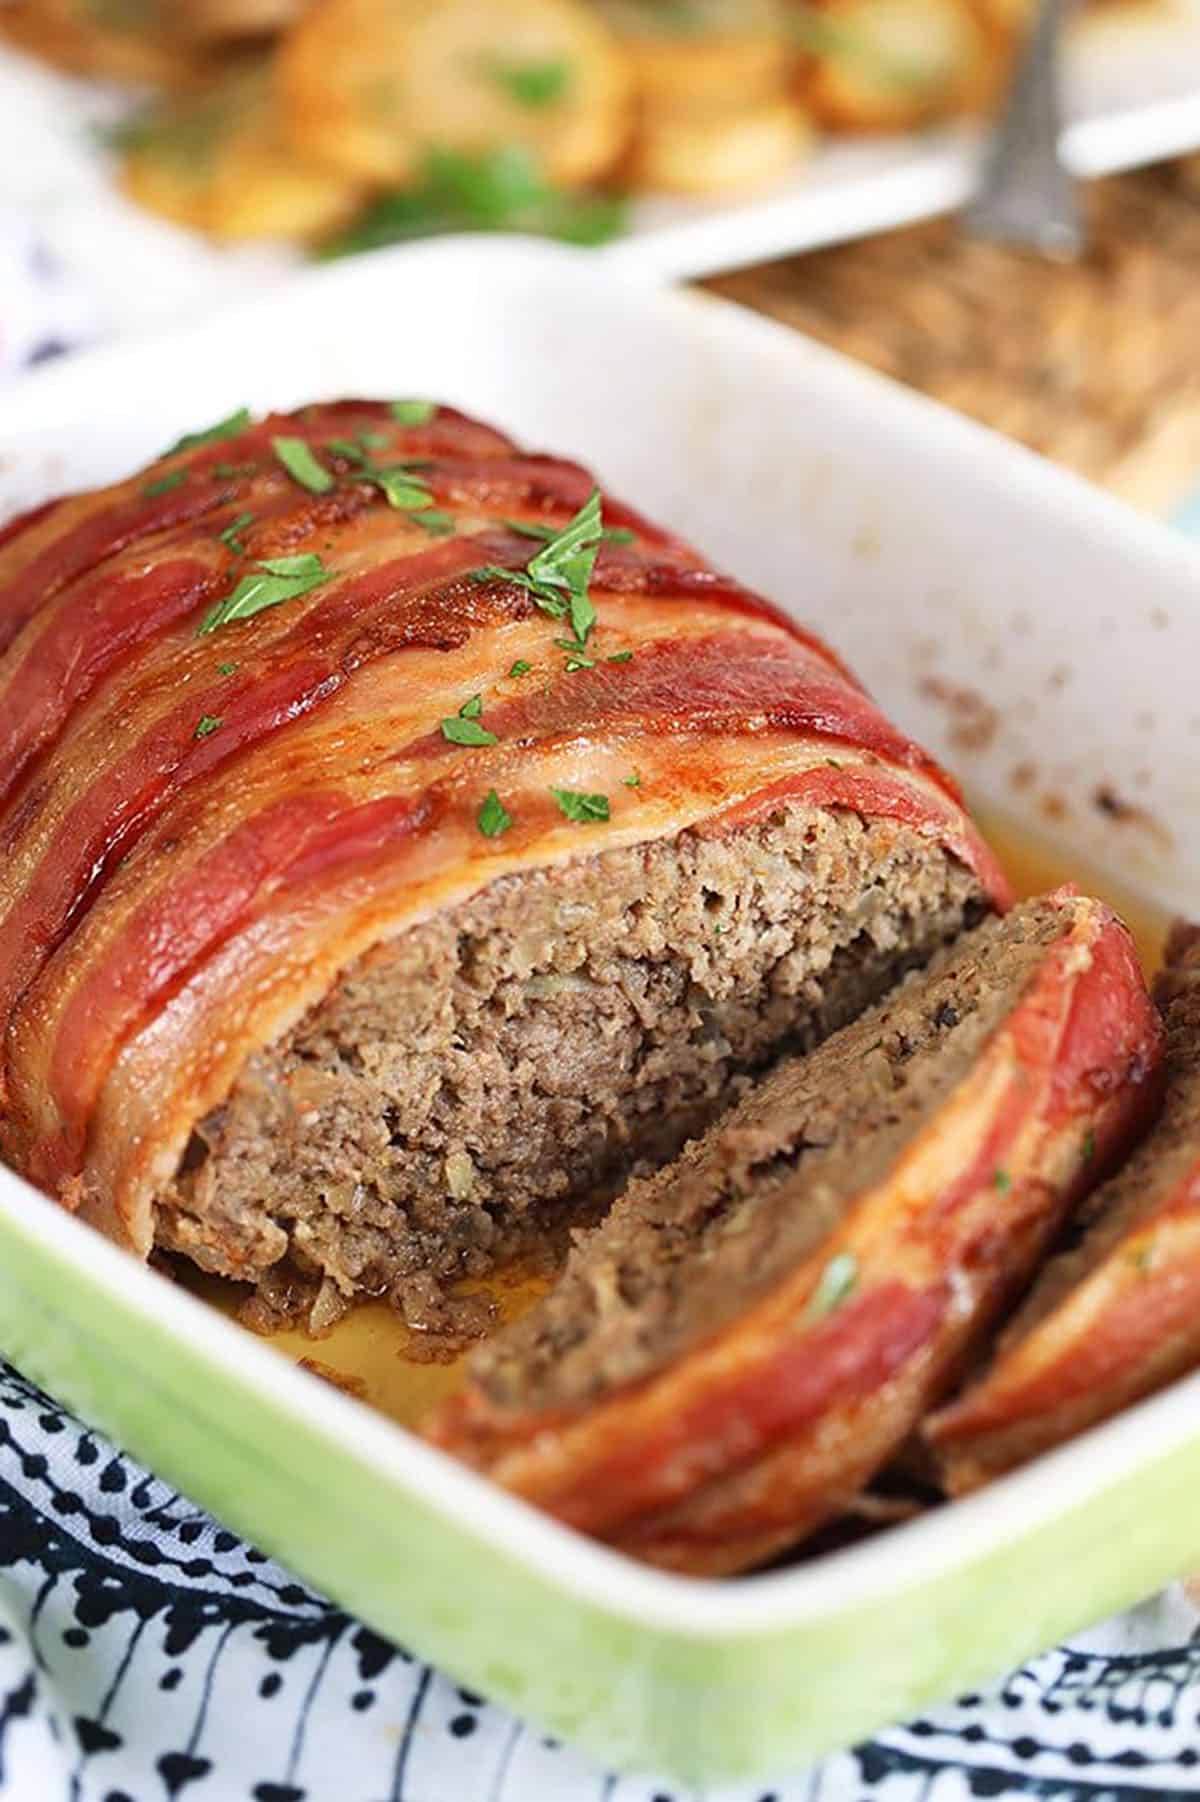 Bacon wrapped meatloaf in a green and white baking dish.